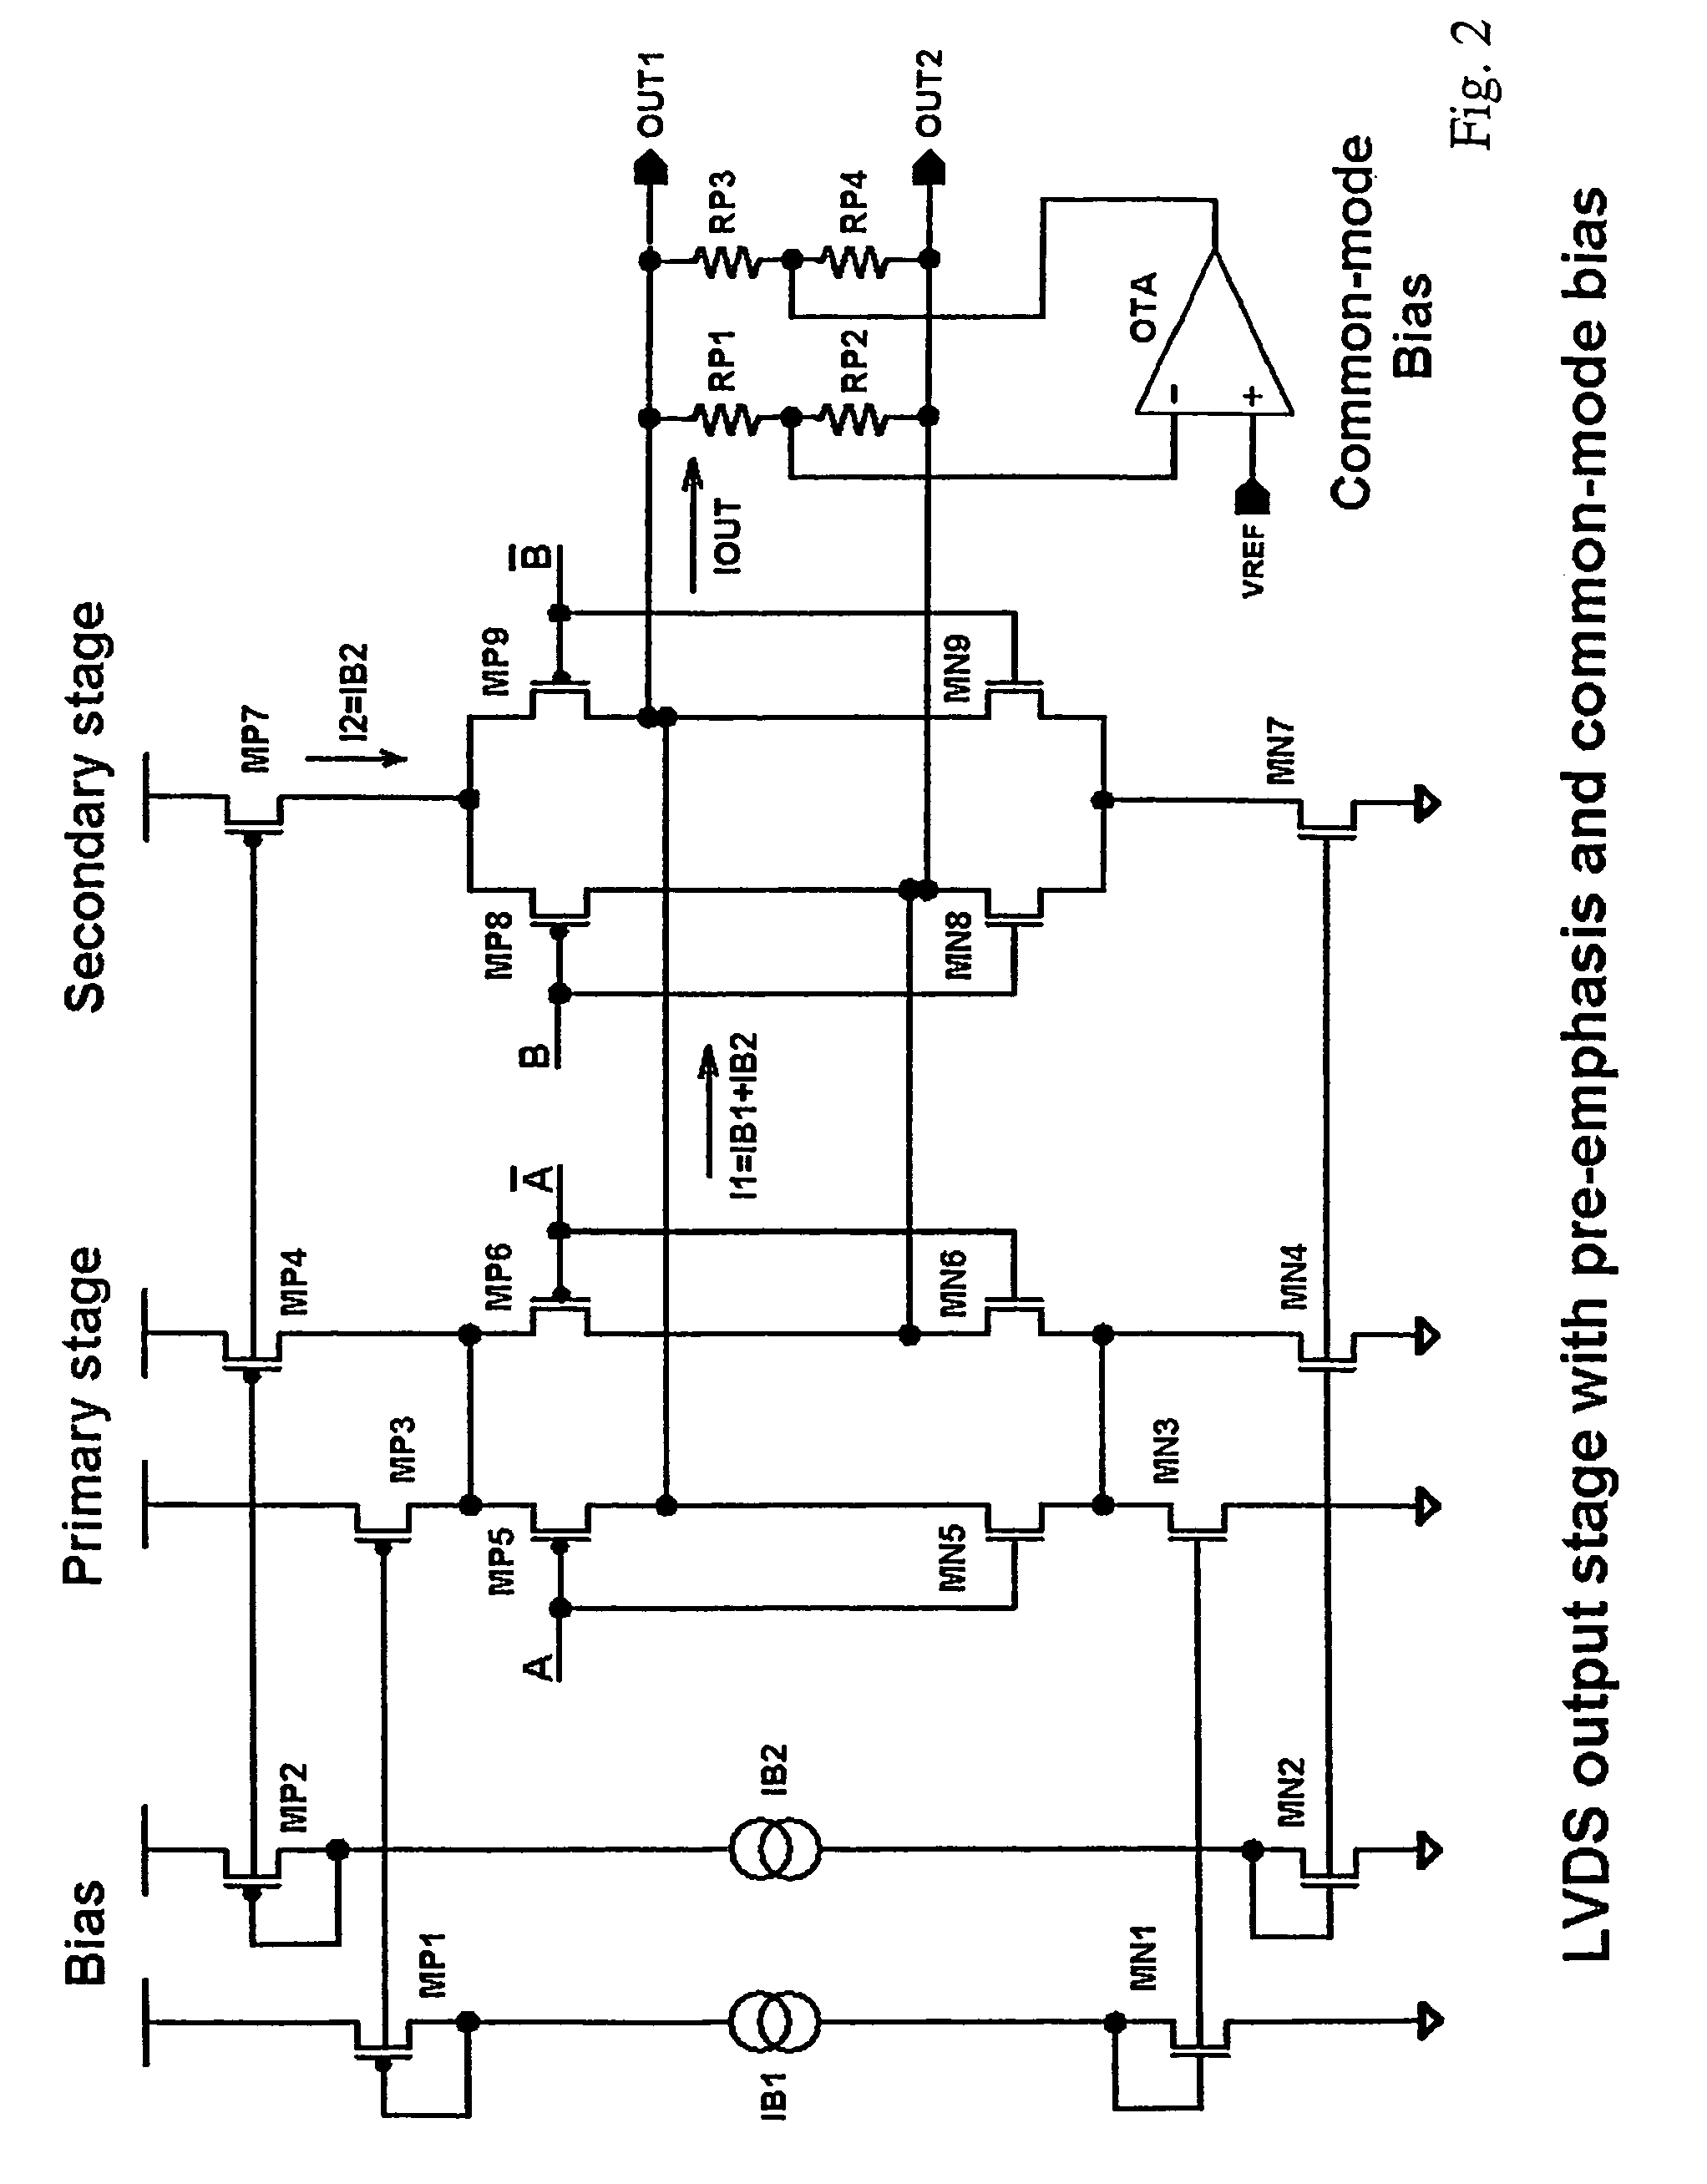 Low voltage differential signaling [LVDS] driver with pre-emphasis